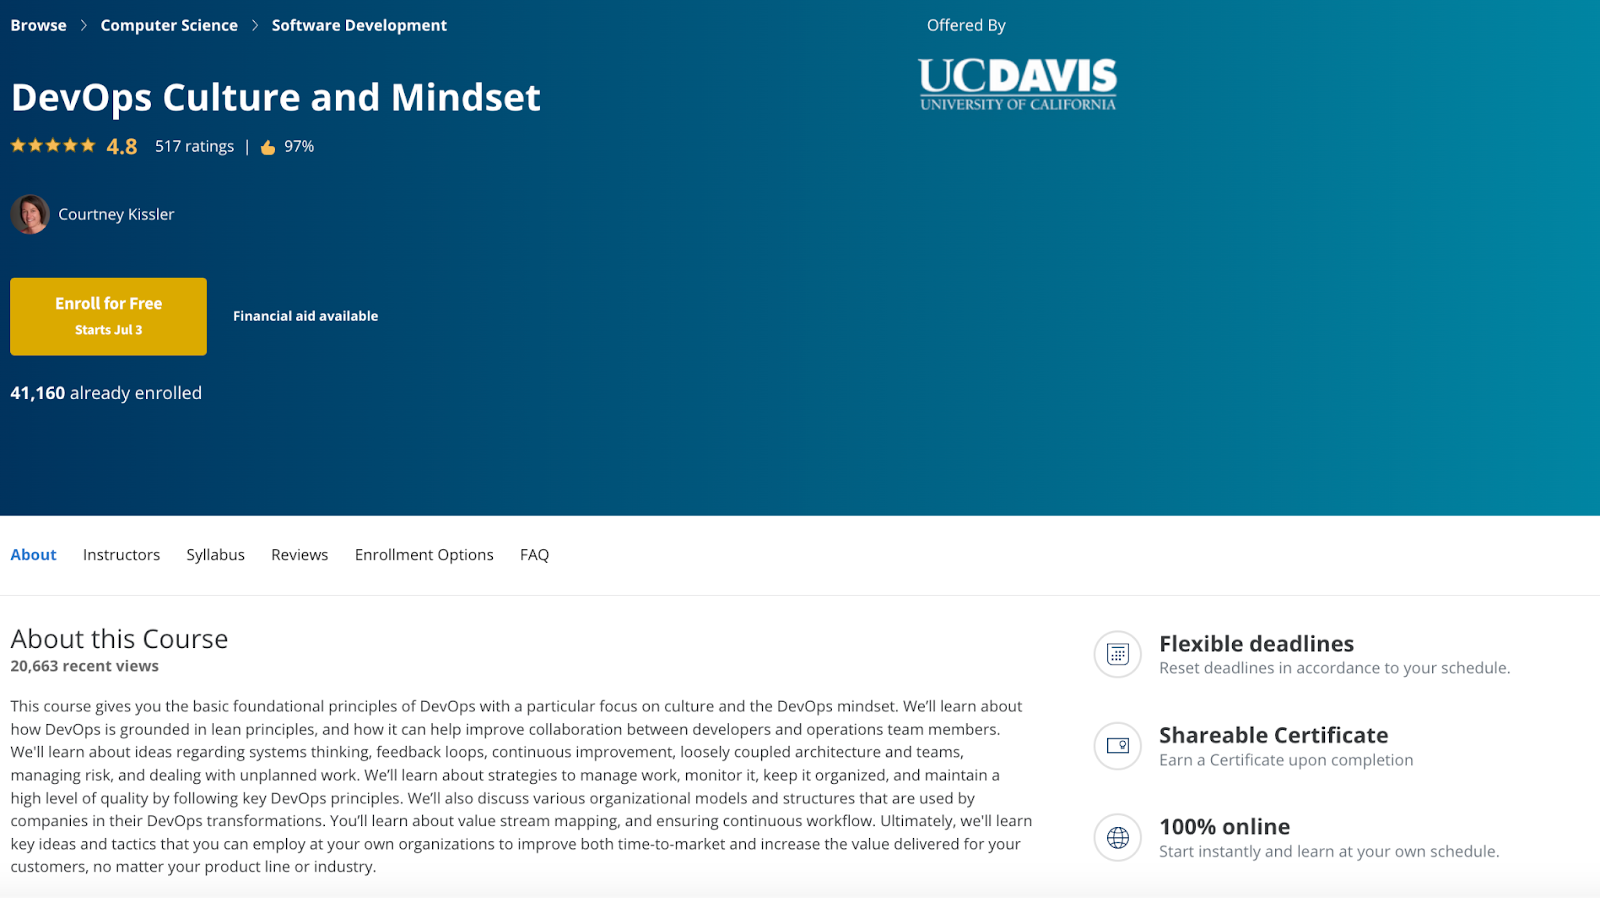 DevOps Culture and Mindset course on Coursera